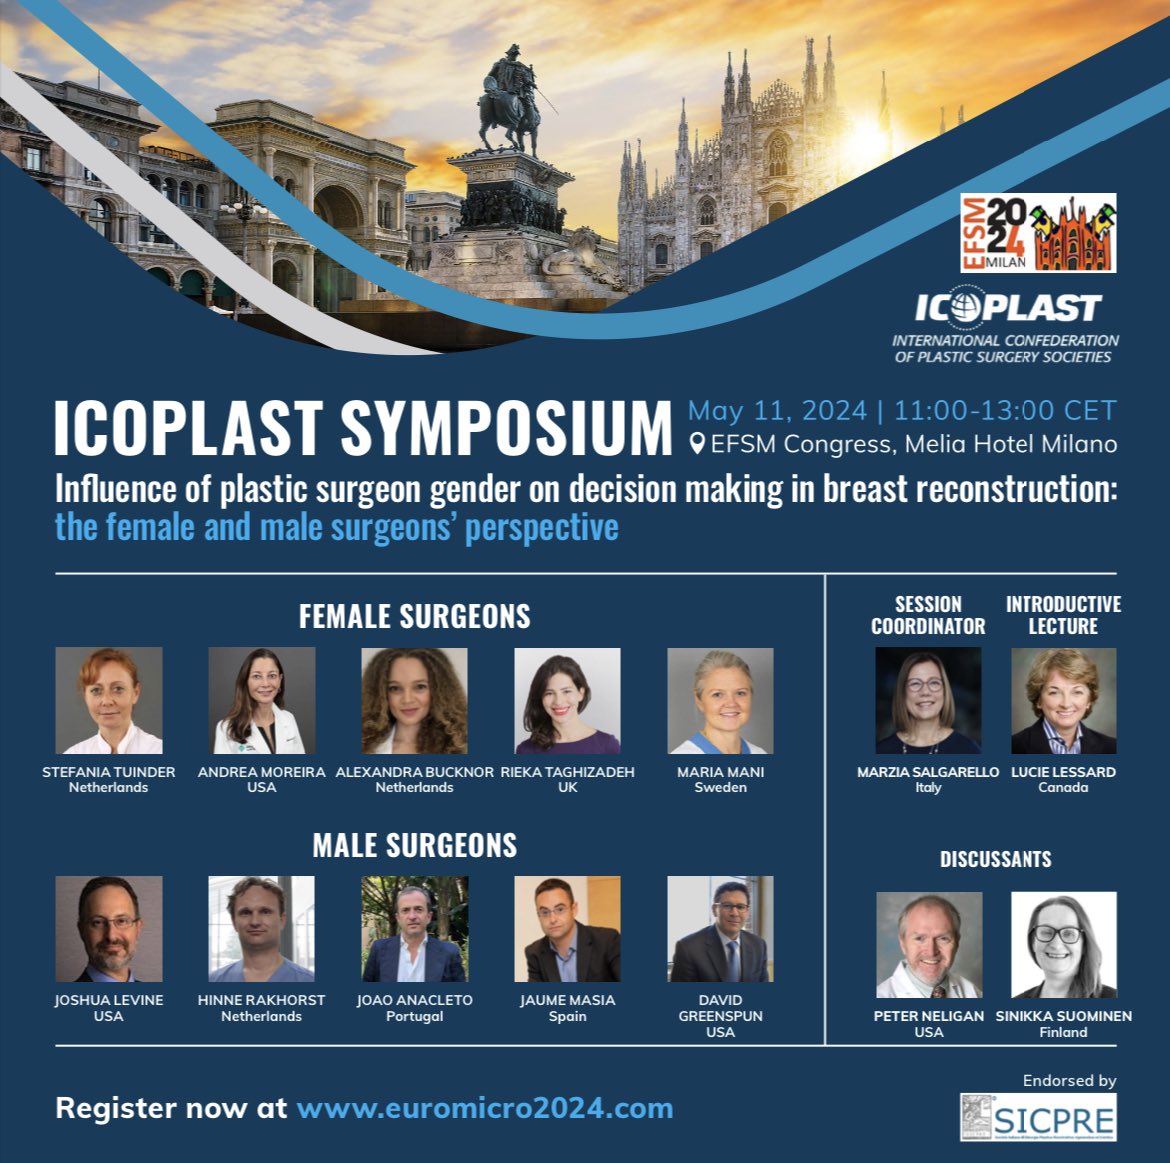 ICOPLAST Symposium on breast recon May 11st, 2024 Coming soon!